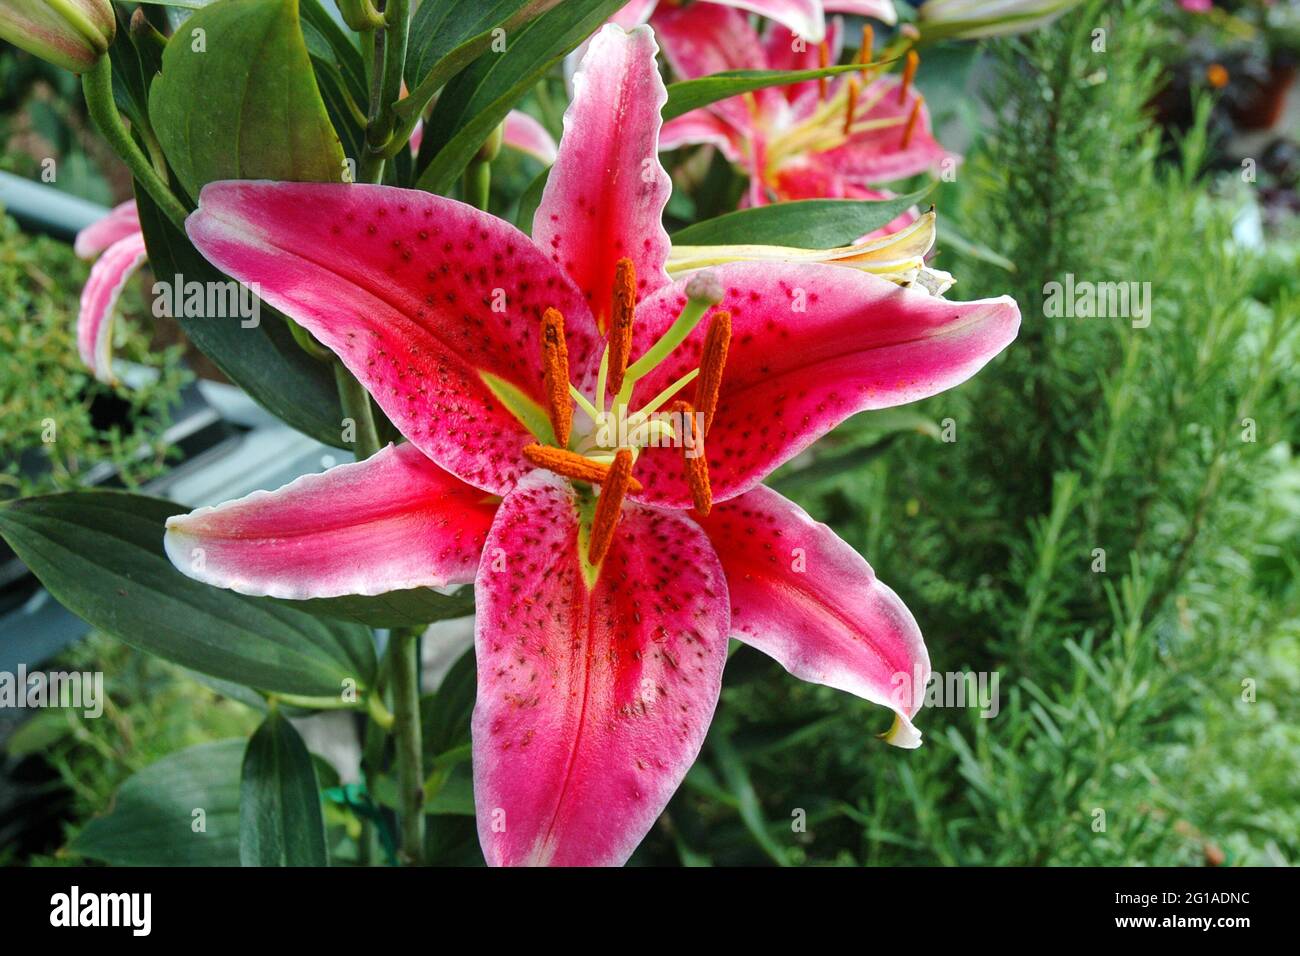 Closeup of a pink day lily with white edging Stock Photo